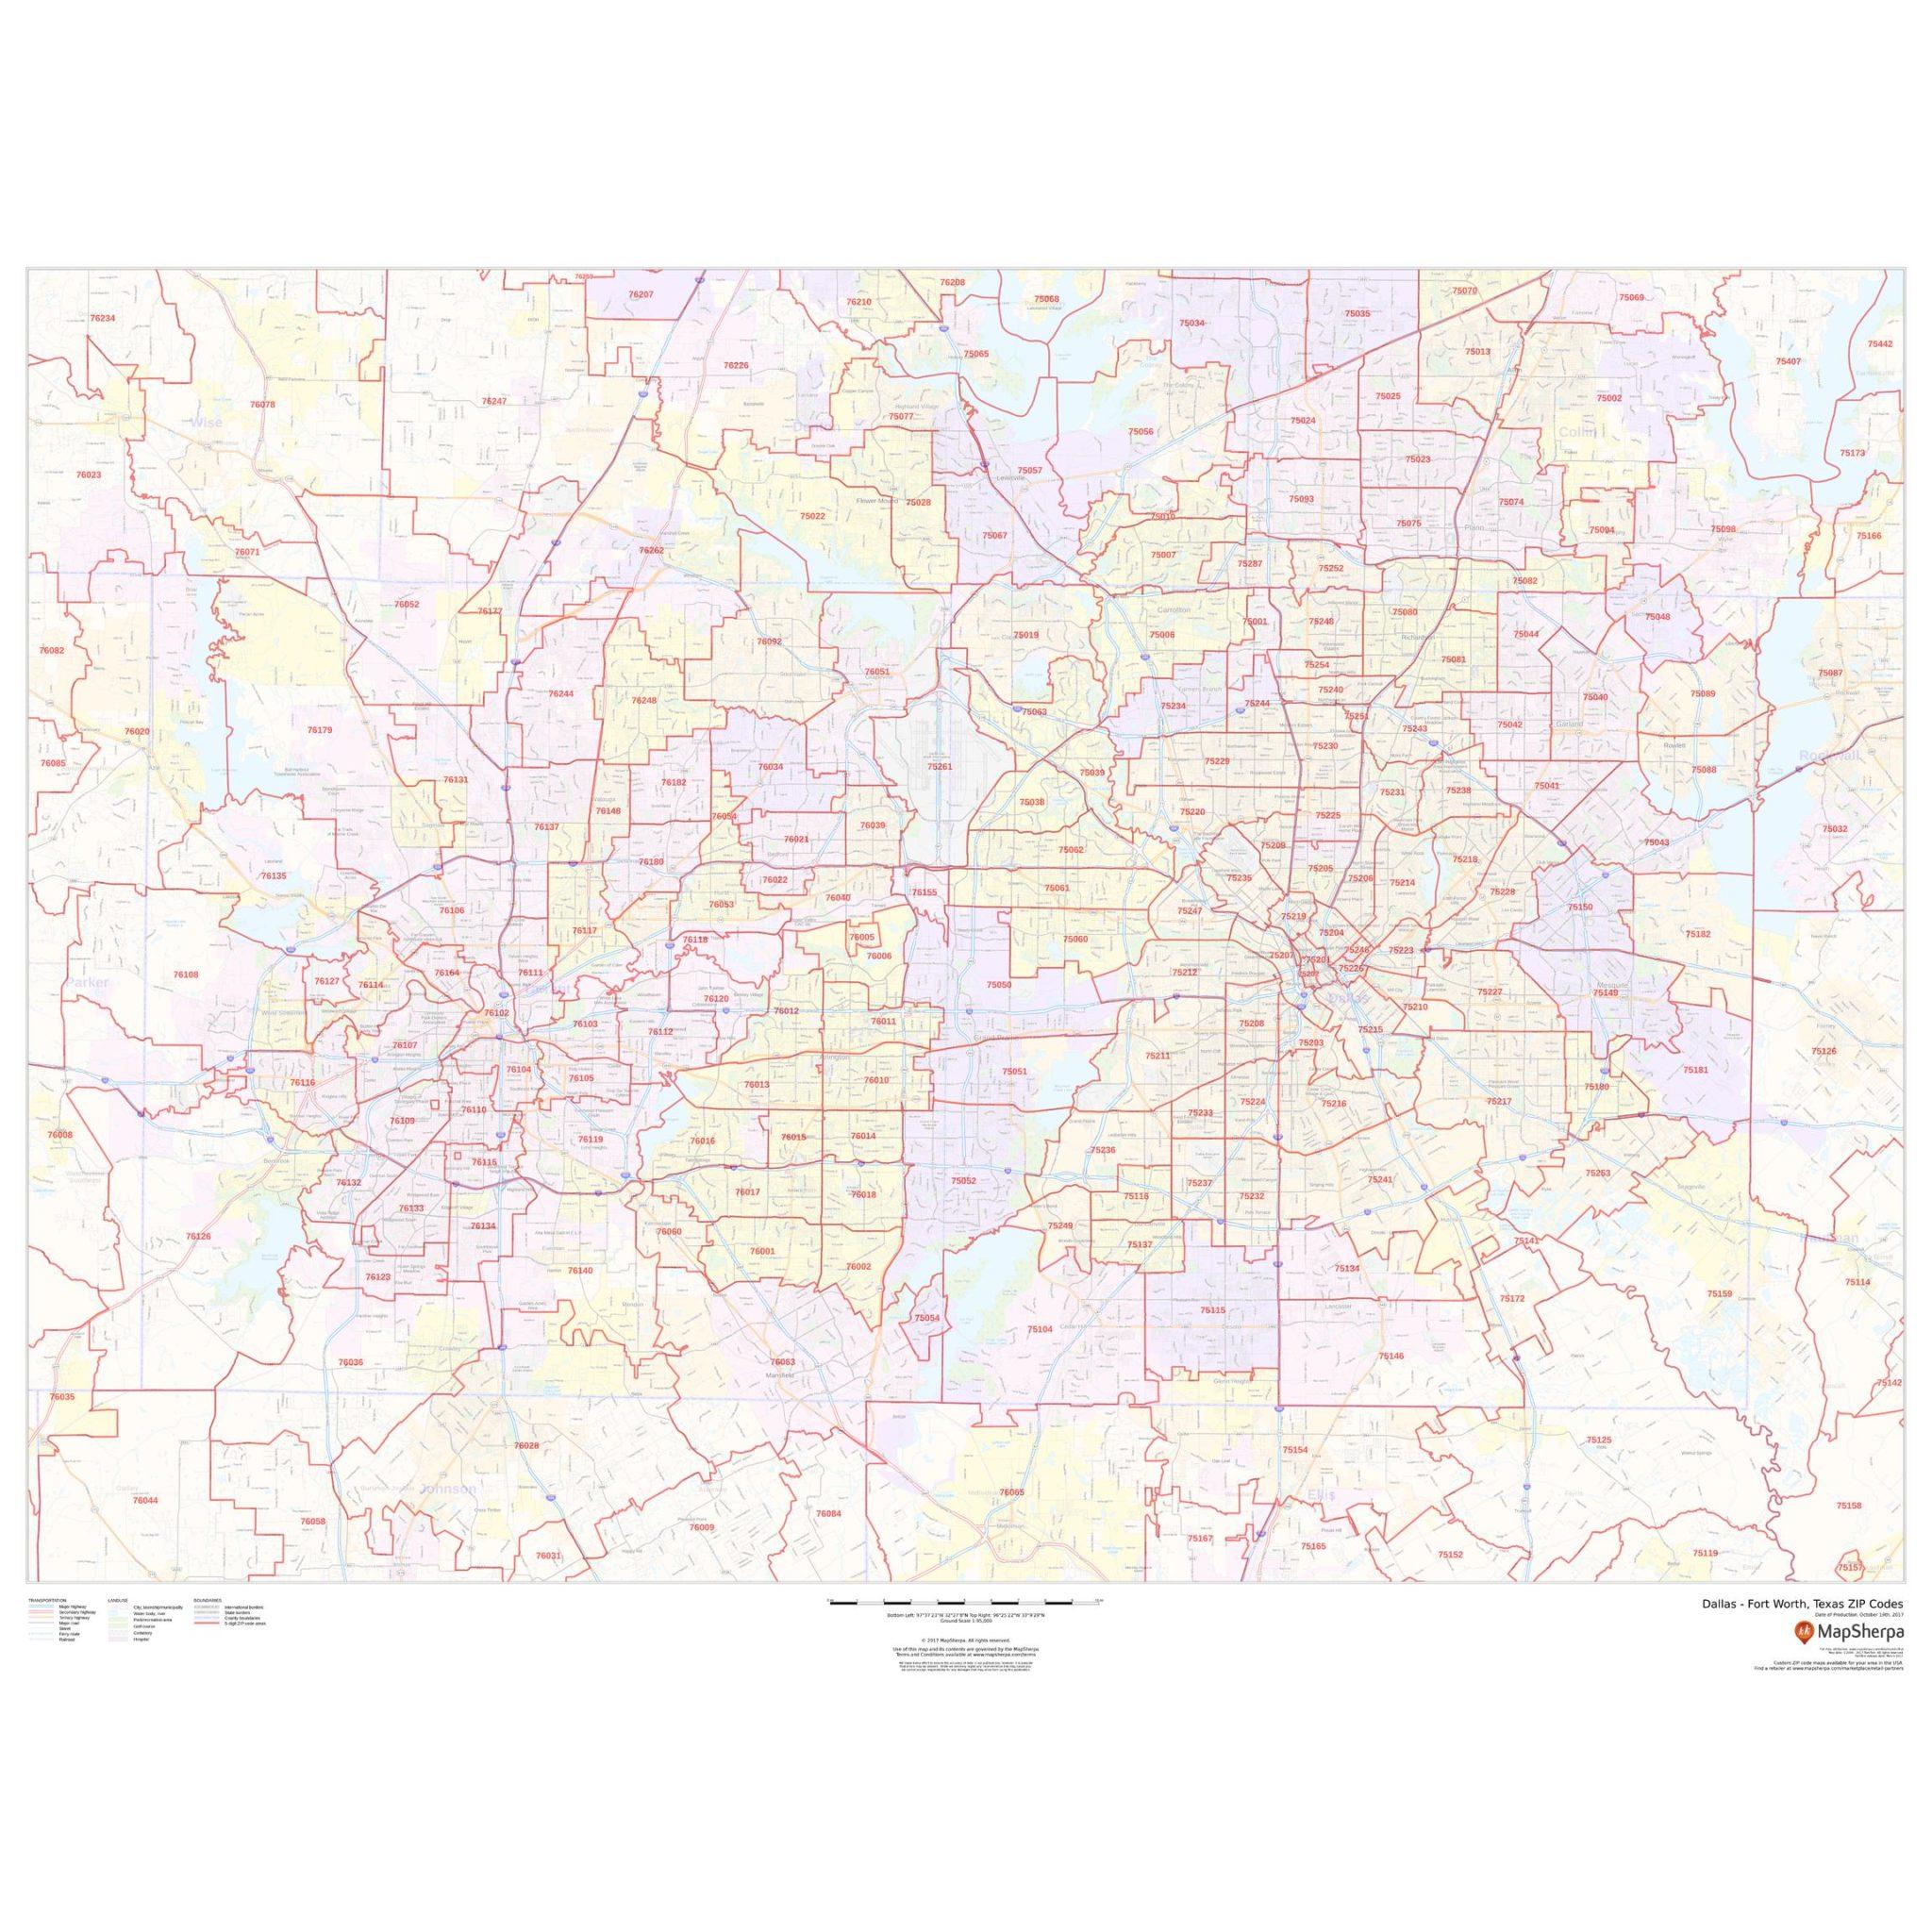 Fort Worth Tx Zip Code Map Dallas - Fort Worth, Texas Zip Codes - The Map Shop